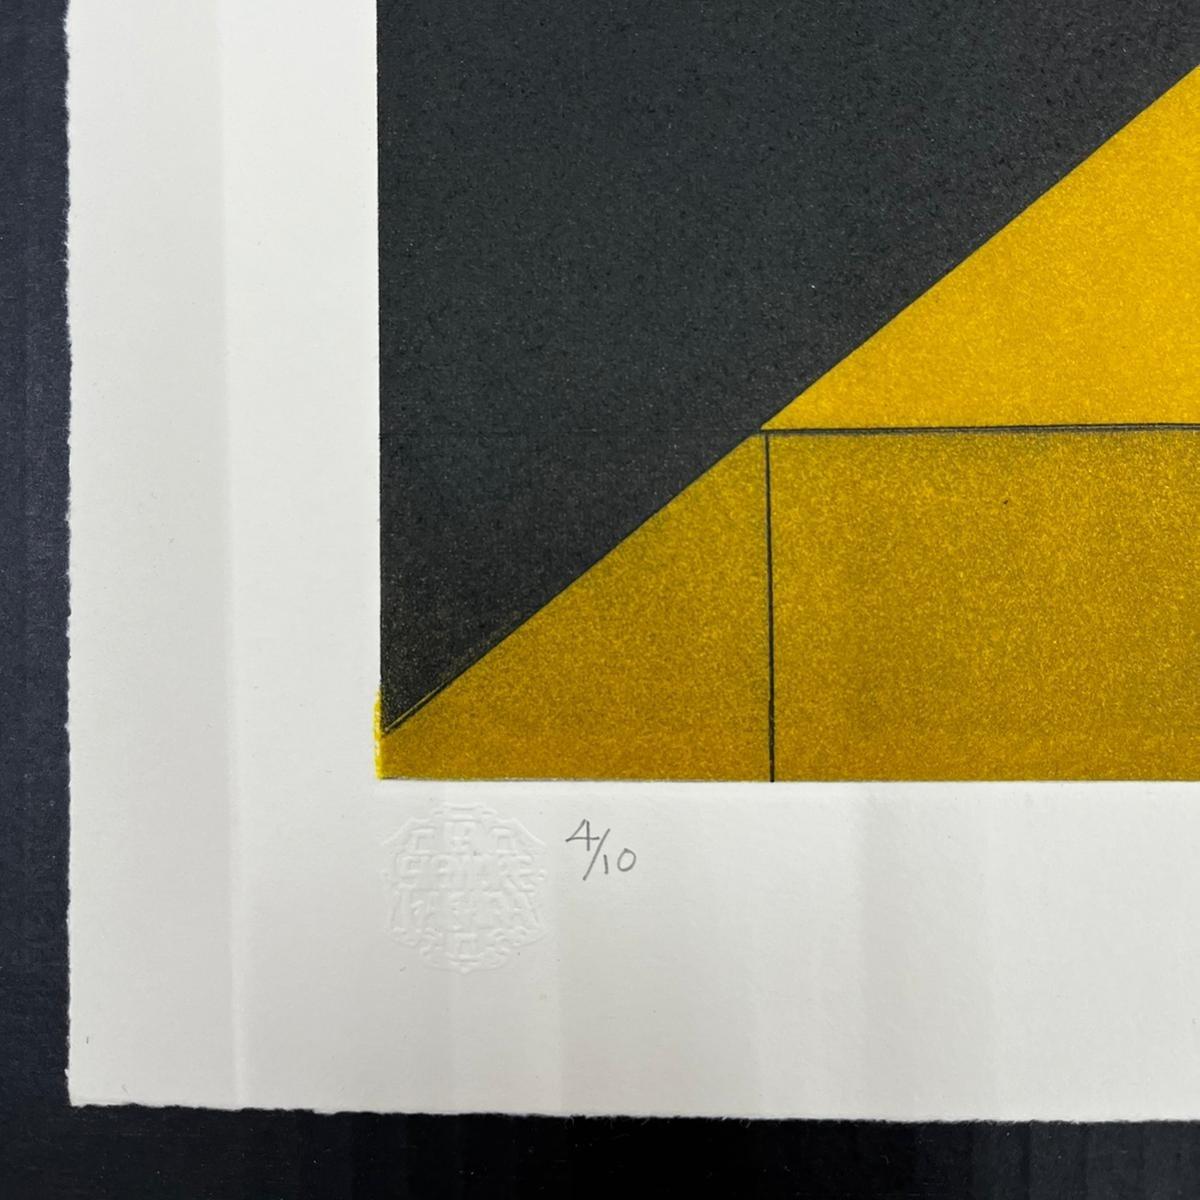 Nestor Arenas (Cuba, 1964)
'Yellow Structure I', 2021
etching, aquatint on paper
21.3 x 27.2 in. (54 x 69 cm.)
Edition of 10
ID: ARN-101
Unframed